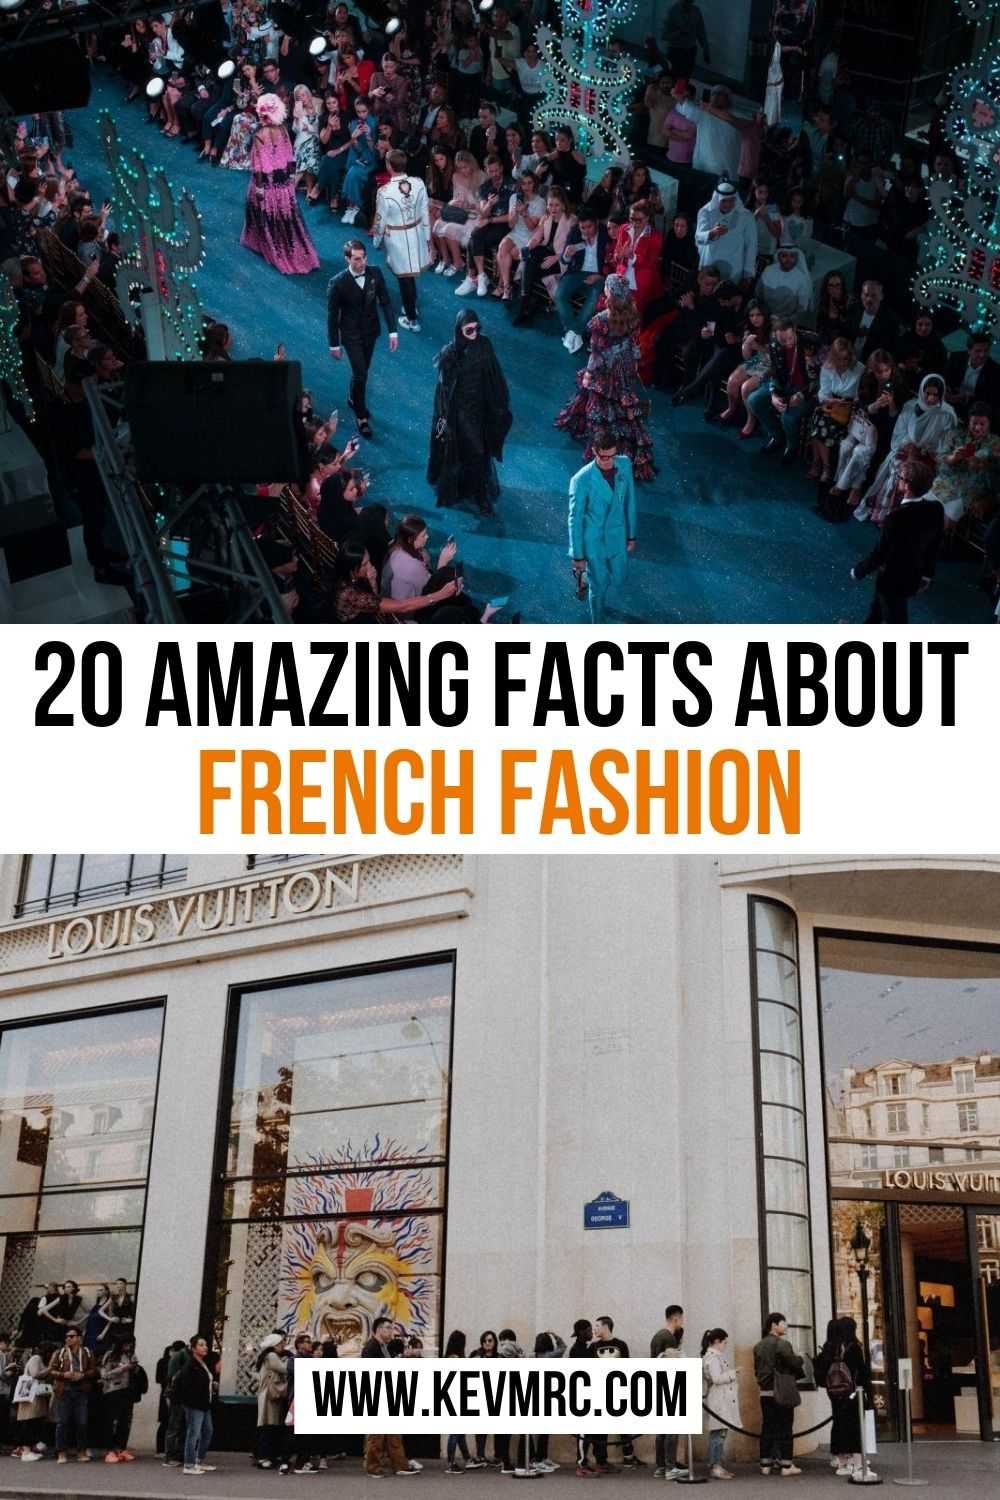 French designers have created some of the most renowned and coveted brands in the world. With innovative styling and remarkable technique, the reputation of the French fashion industry dates back to at least the 17th century, and its prestige has only grown since then. Discover 20 interesting facts about fashion in France.  